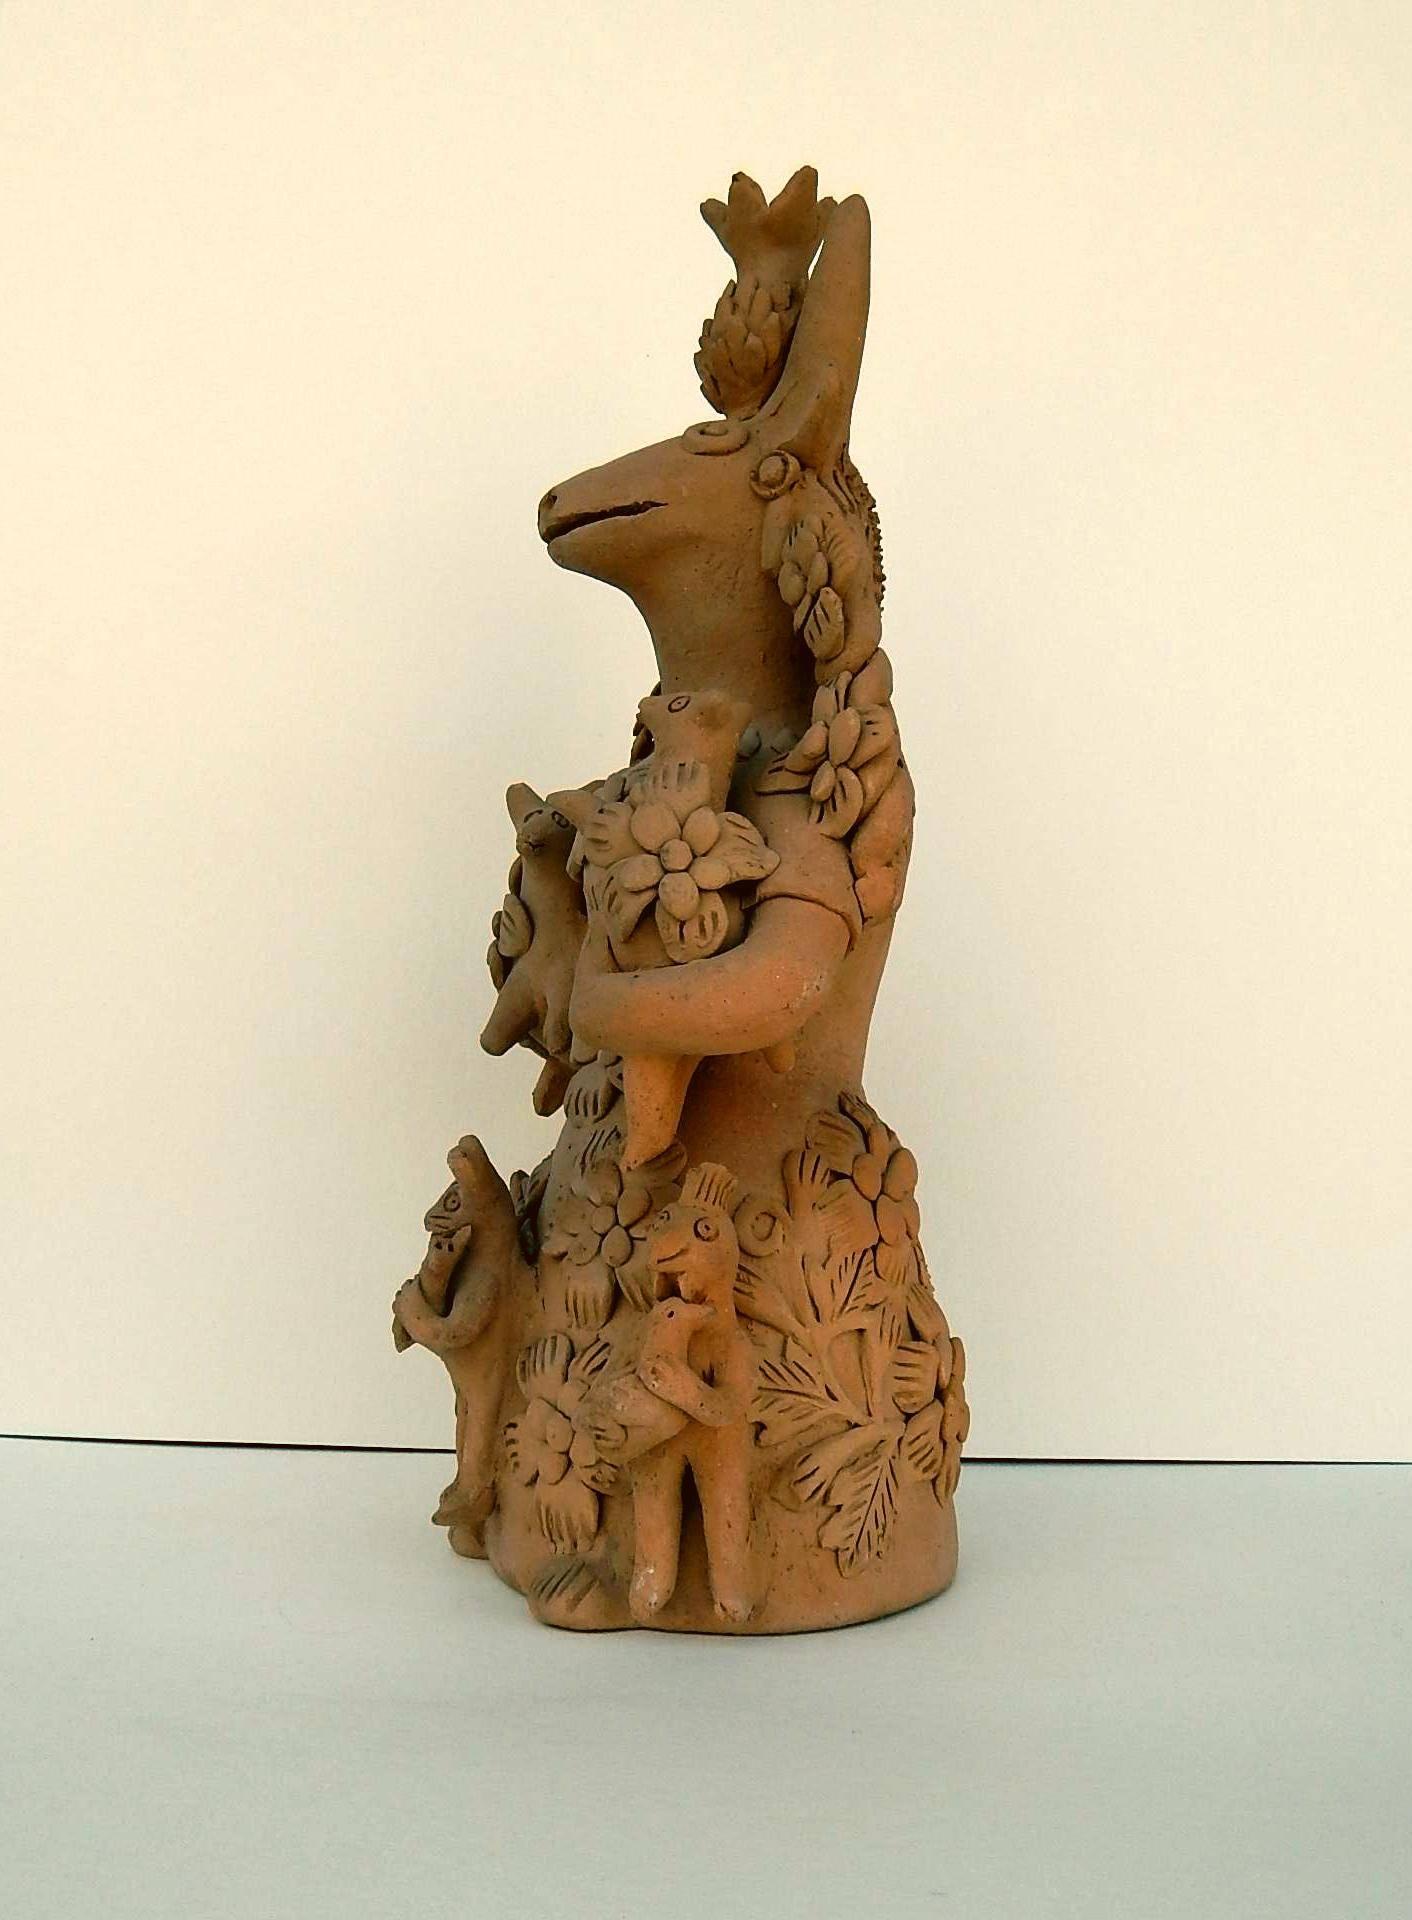 Oaxacan folk art piece in terracotta. 
Incised signature on the back: “T.B.”
This surreal animalistic mother figure is holding animal babies who in turn are holding smaller animals. 13 ½